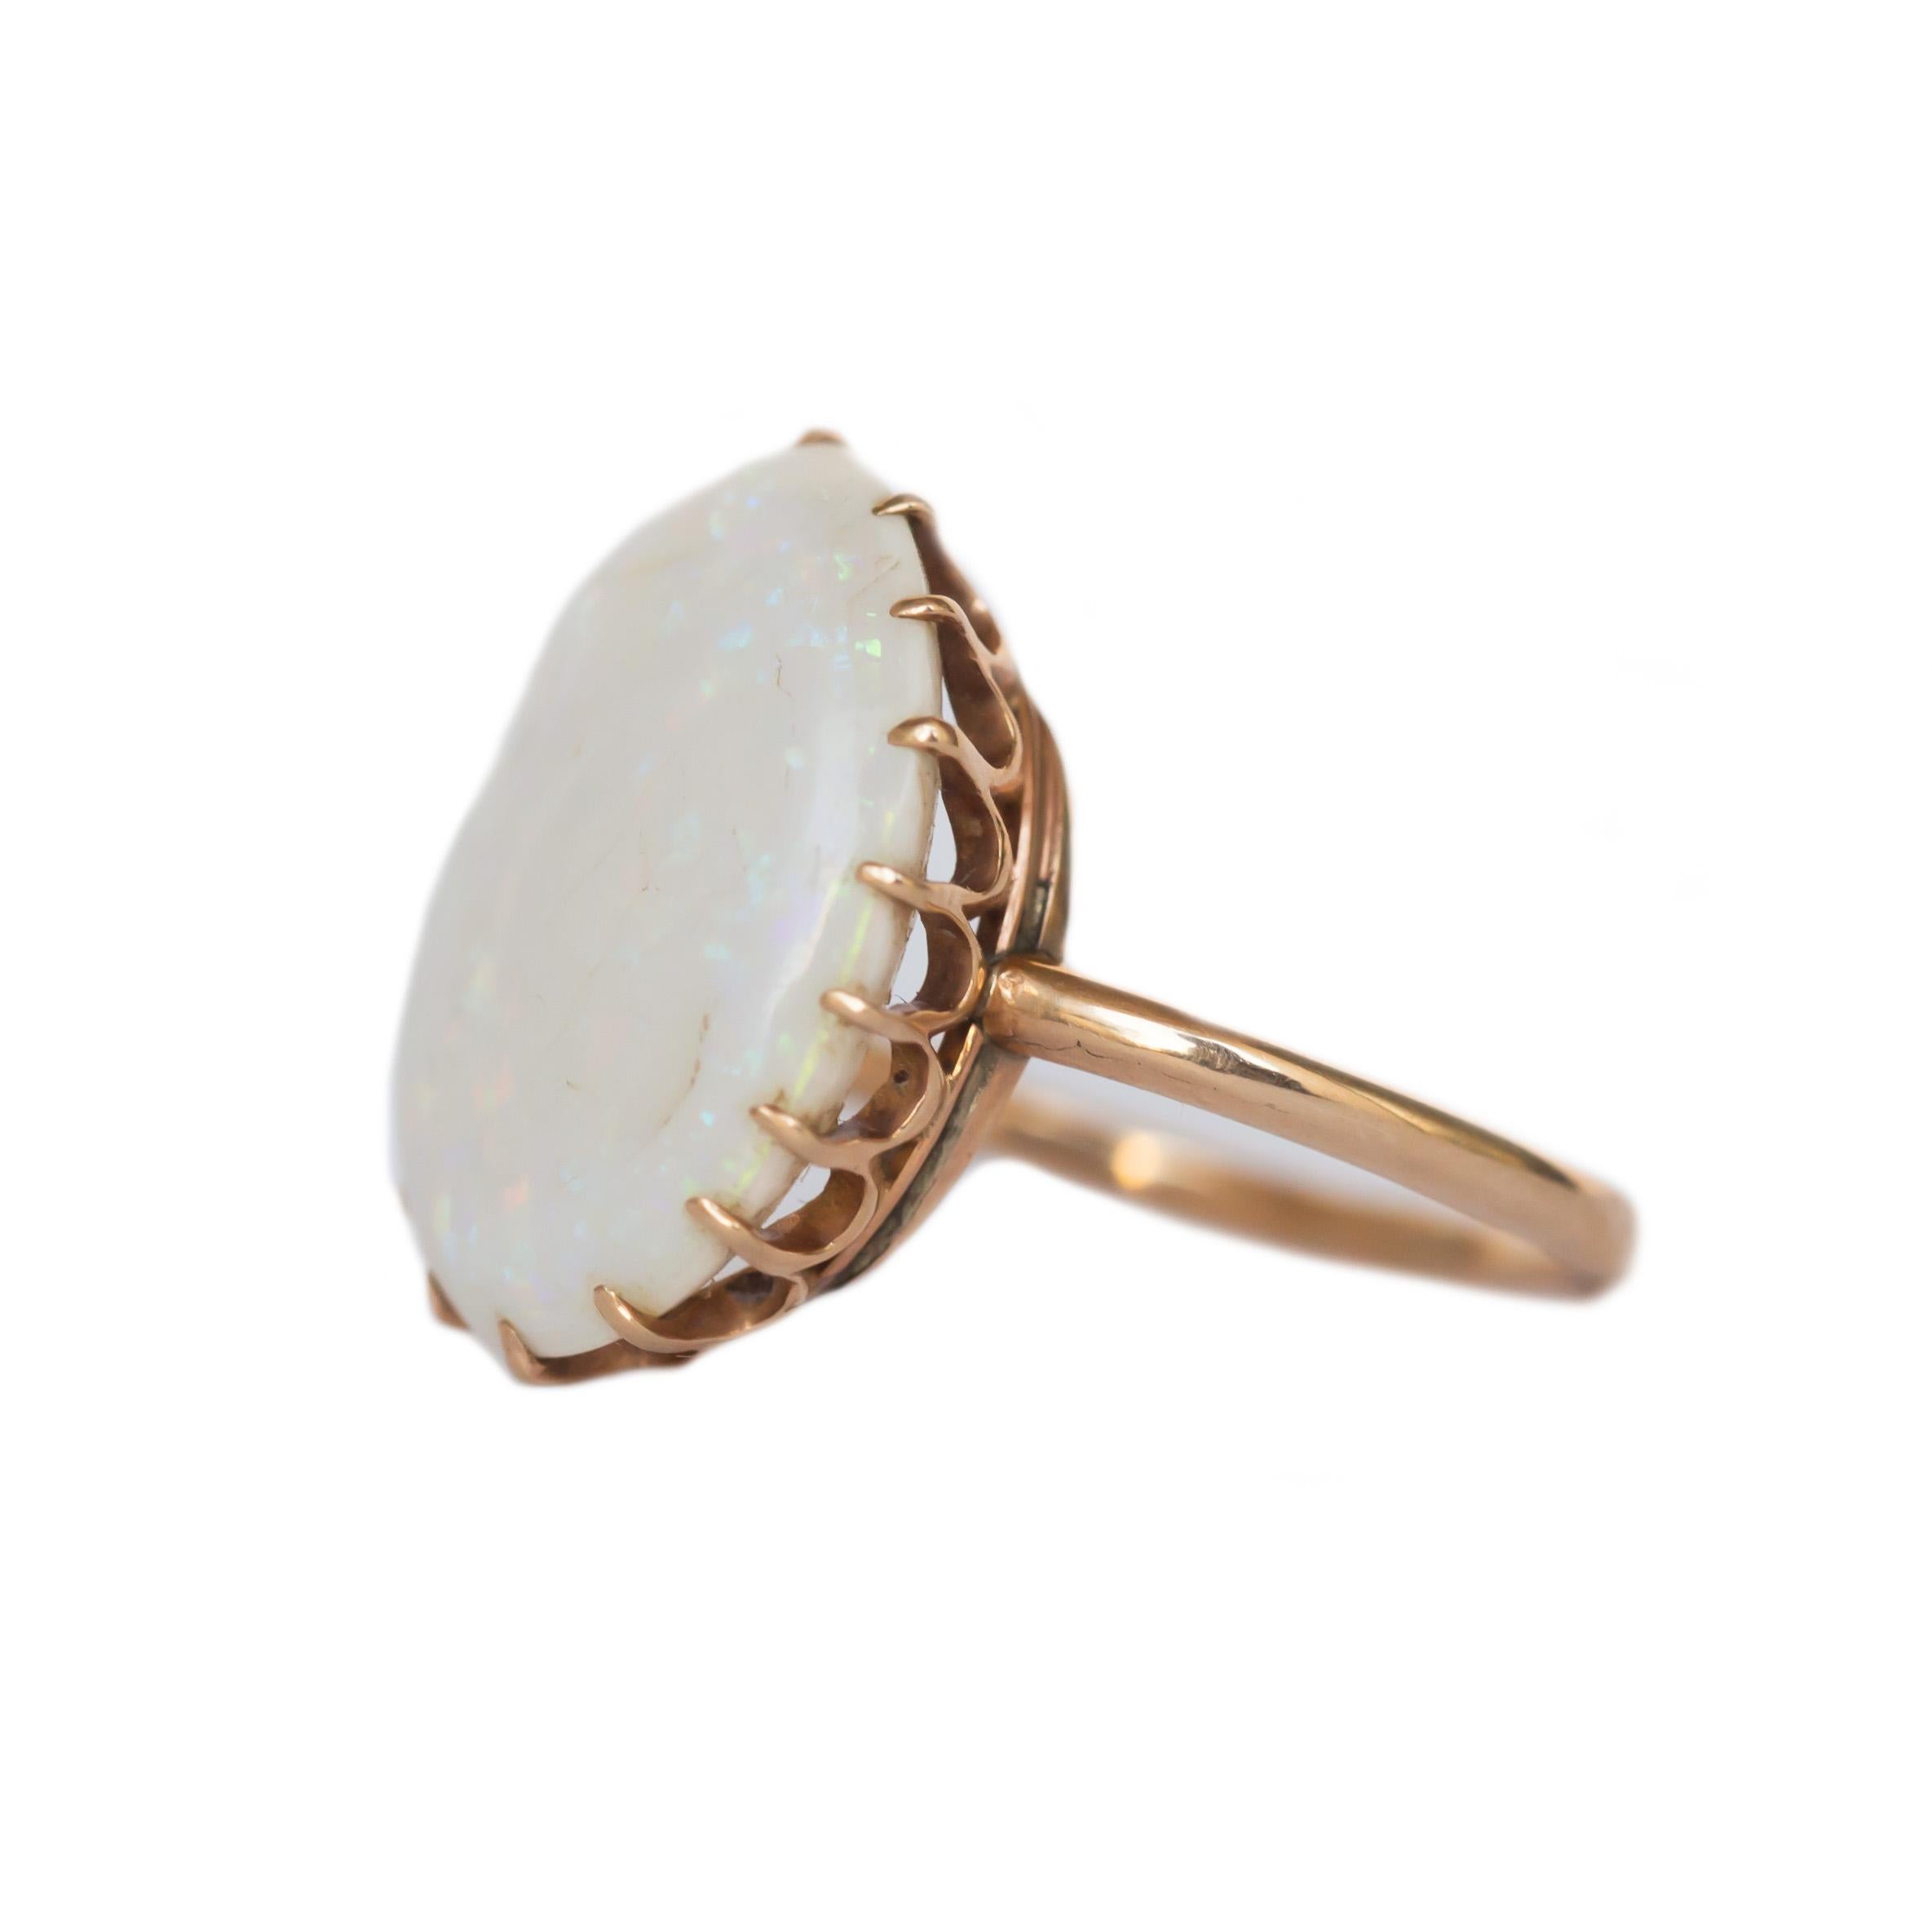 Ring Size: 5
Metal Type: 14 karat Rose Gold [Tested]
Weight: 3.0 grams

Color Stone Details: 
Type: Opal
Shape: Oval Cabachon
Carat Weight: 4 carat, total weight.
Color: White with Rainbow Color Play

Finger to Top of Stone Measurement: